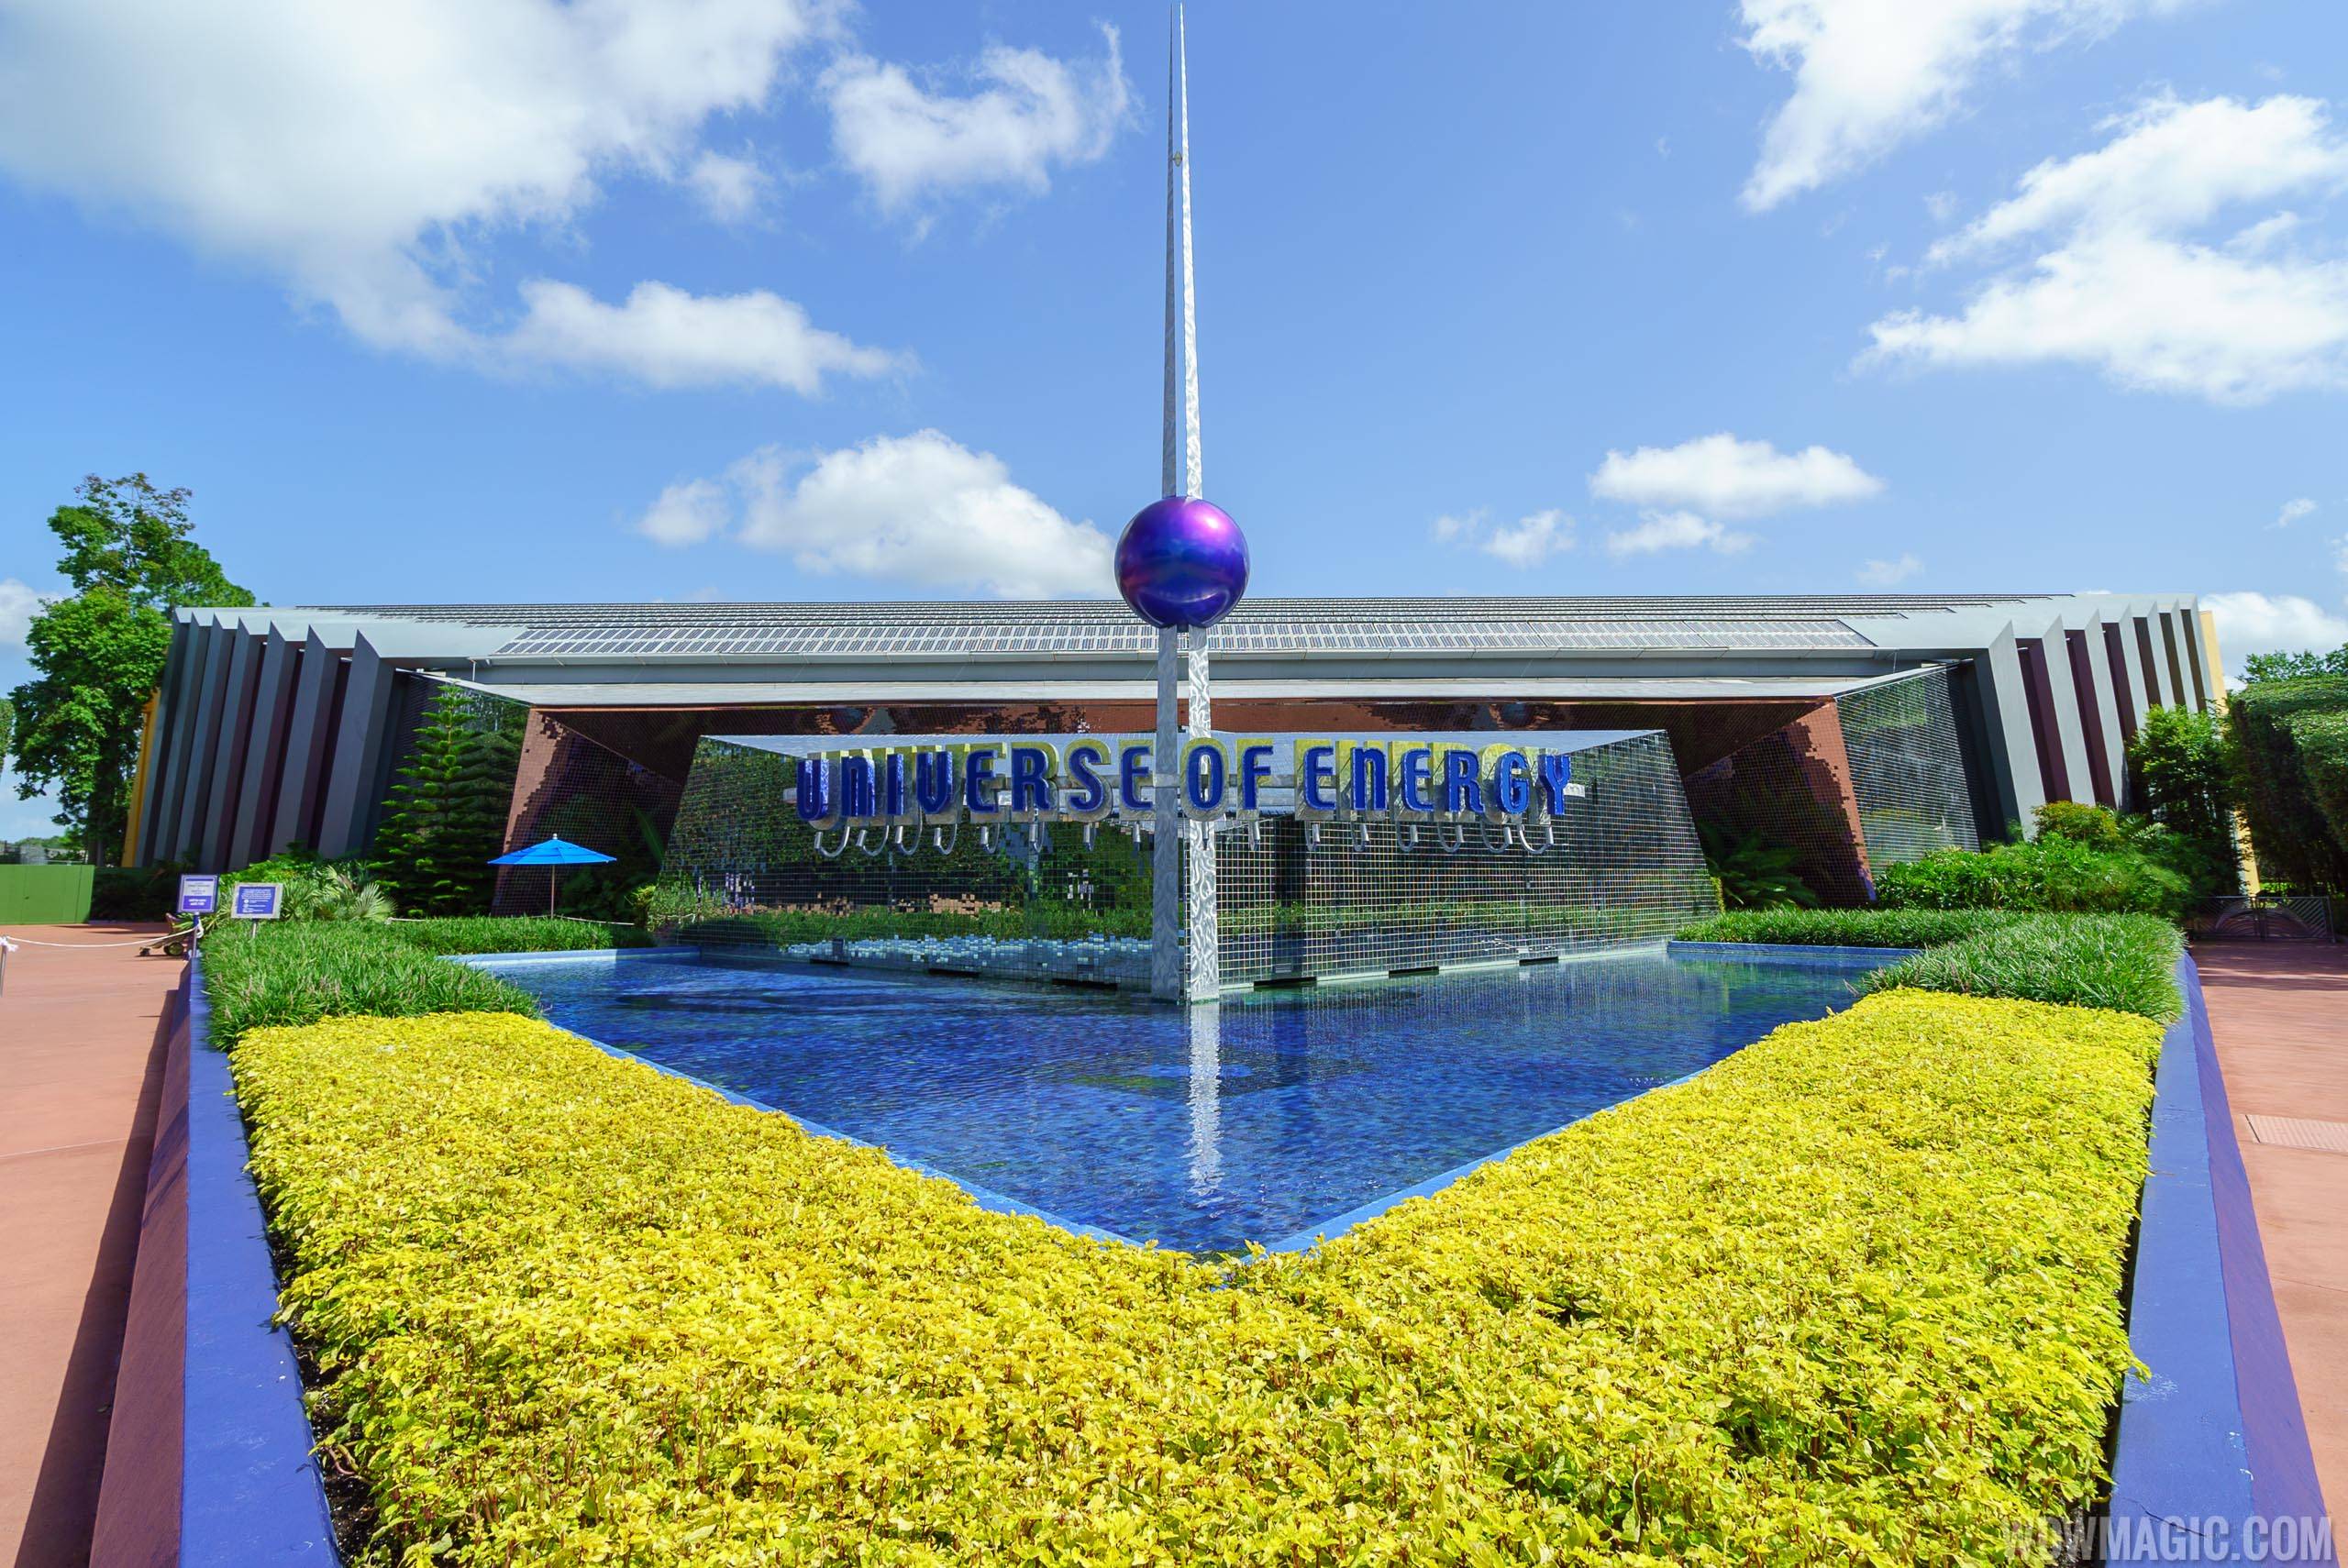 Universe of Energy open today after refurbishment